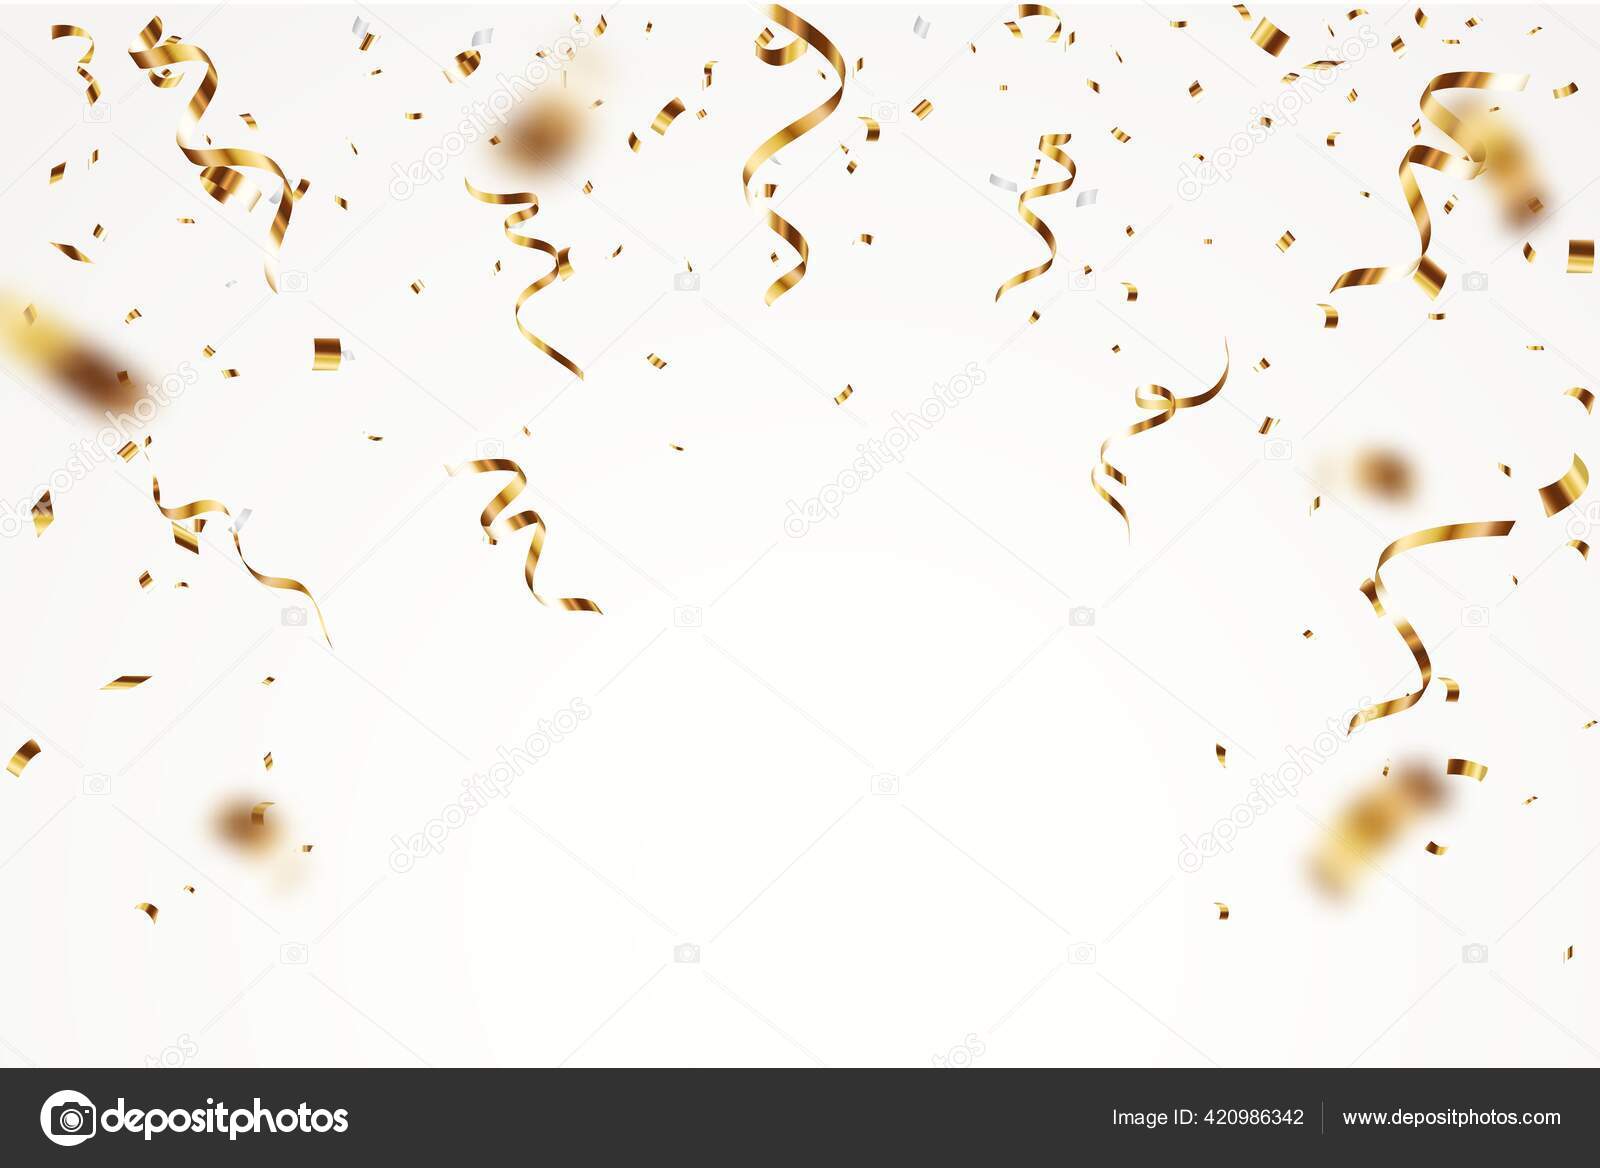 Confetti isolated Vectors & Illustrations for Free Download